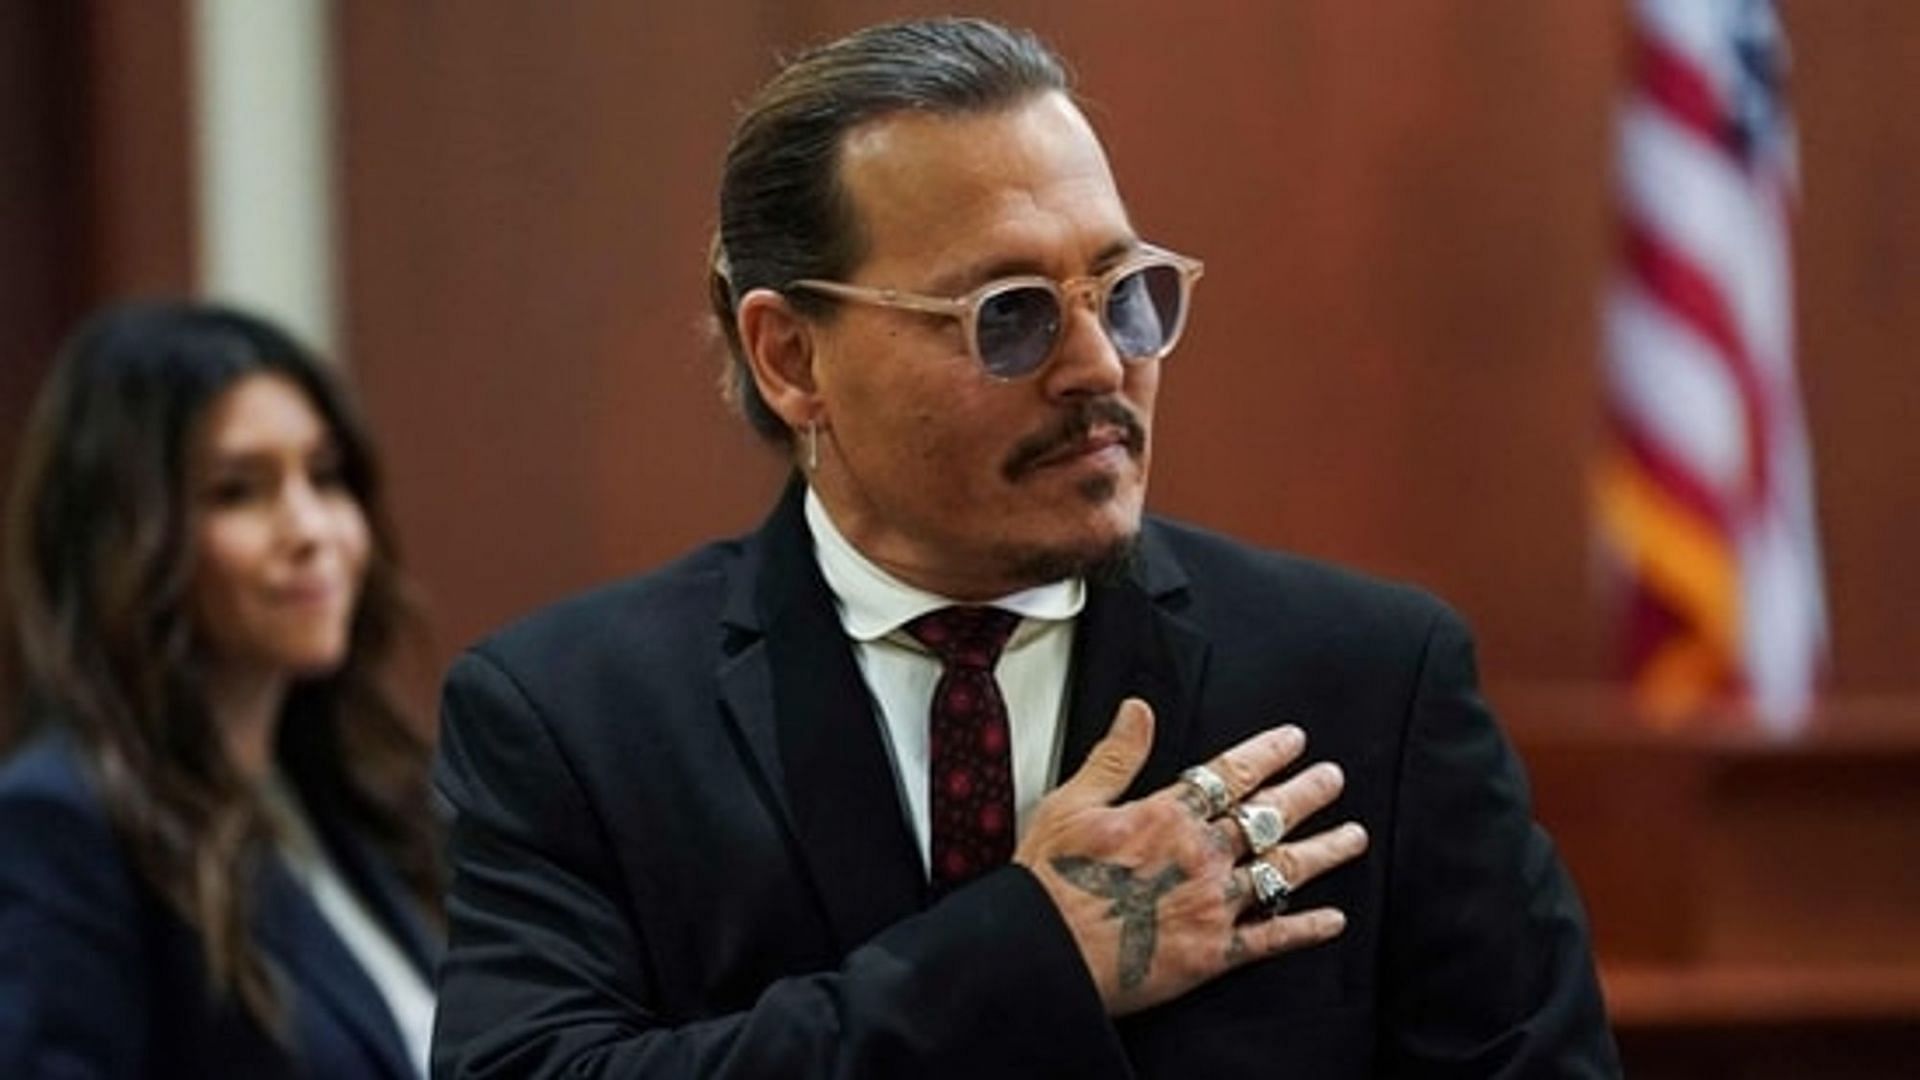 Johnny Depp spotted at Newcastle, UK pub moments before defamation trial verdict announcement (Image via Getty Images)